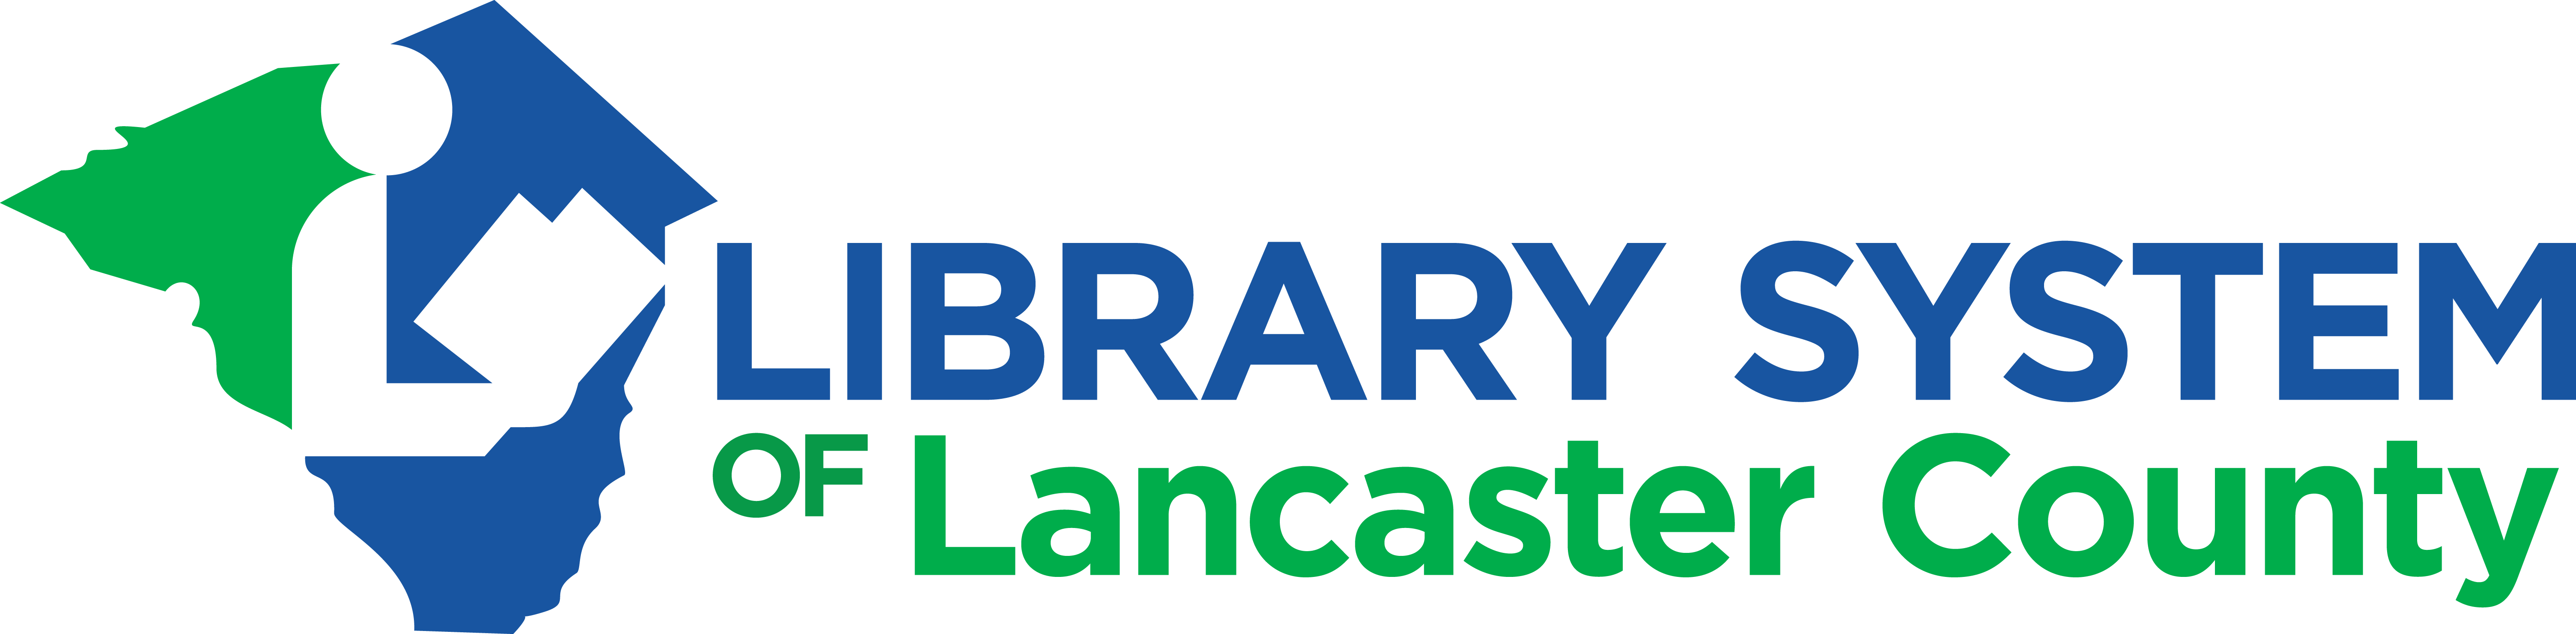 Library System of Lancaster County logo